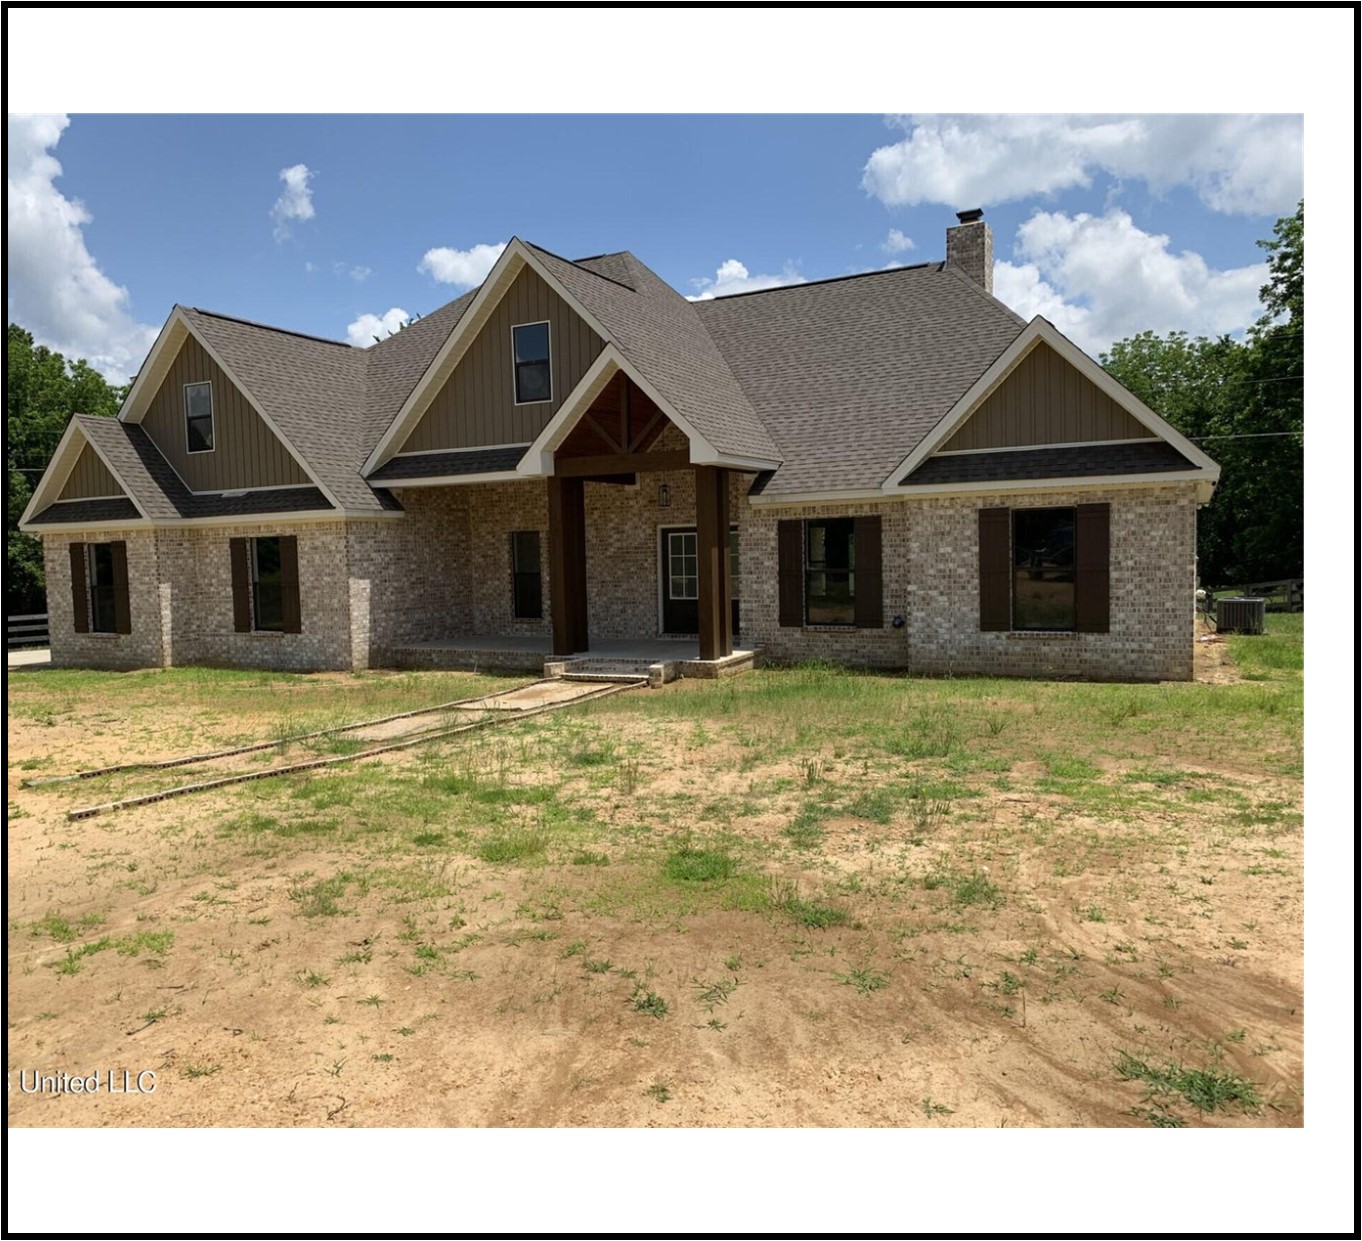 106.8 Acres with a Home in Panola County at 1000 Hawkins Road in Courtland, MS 